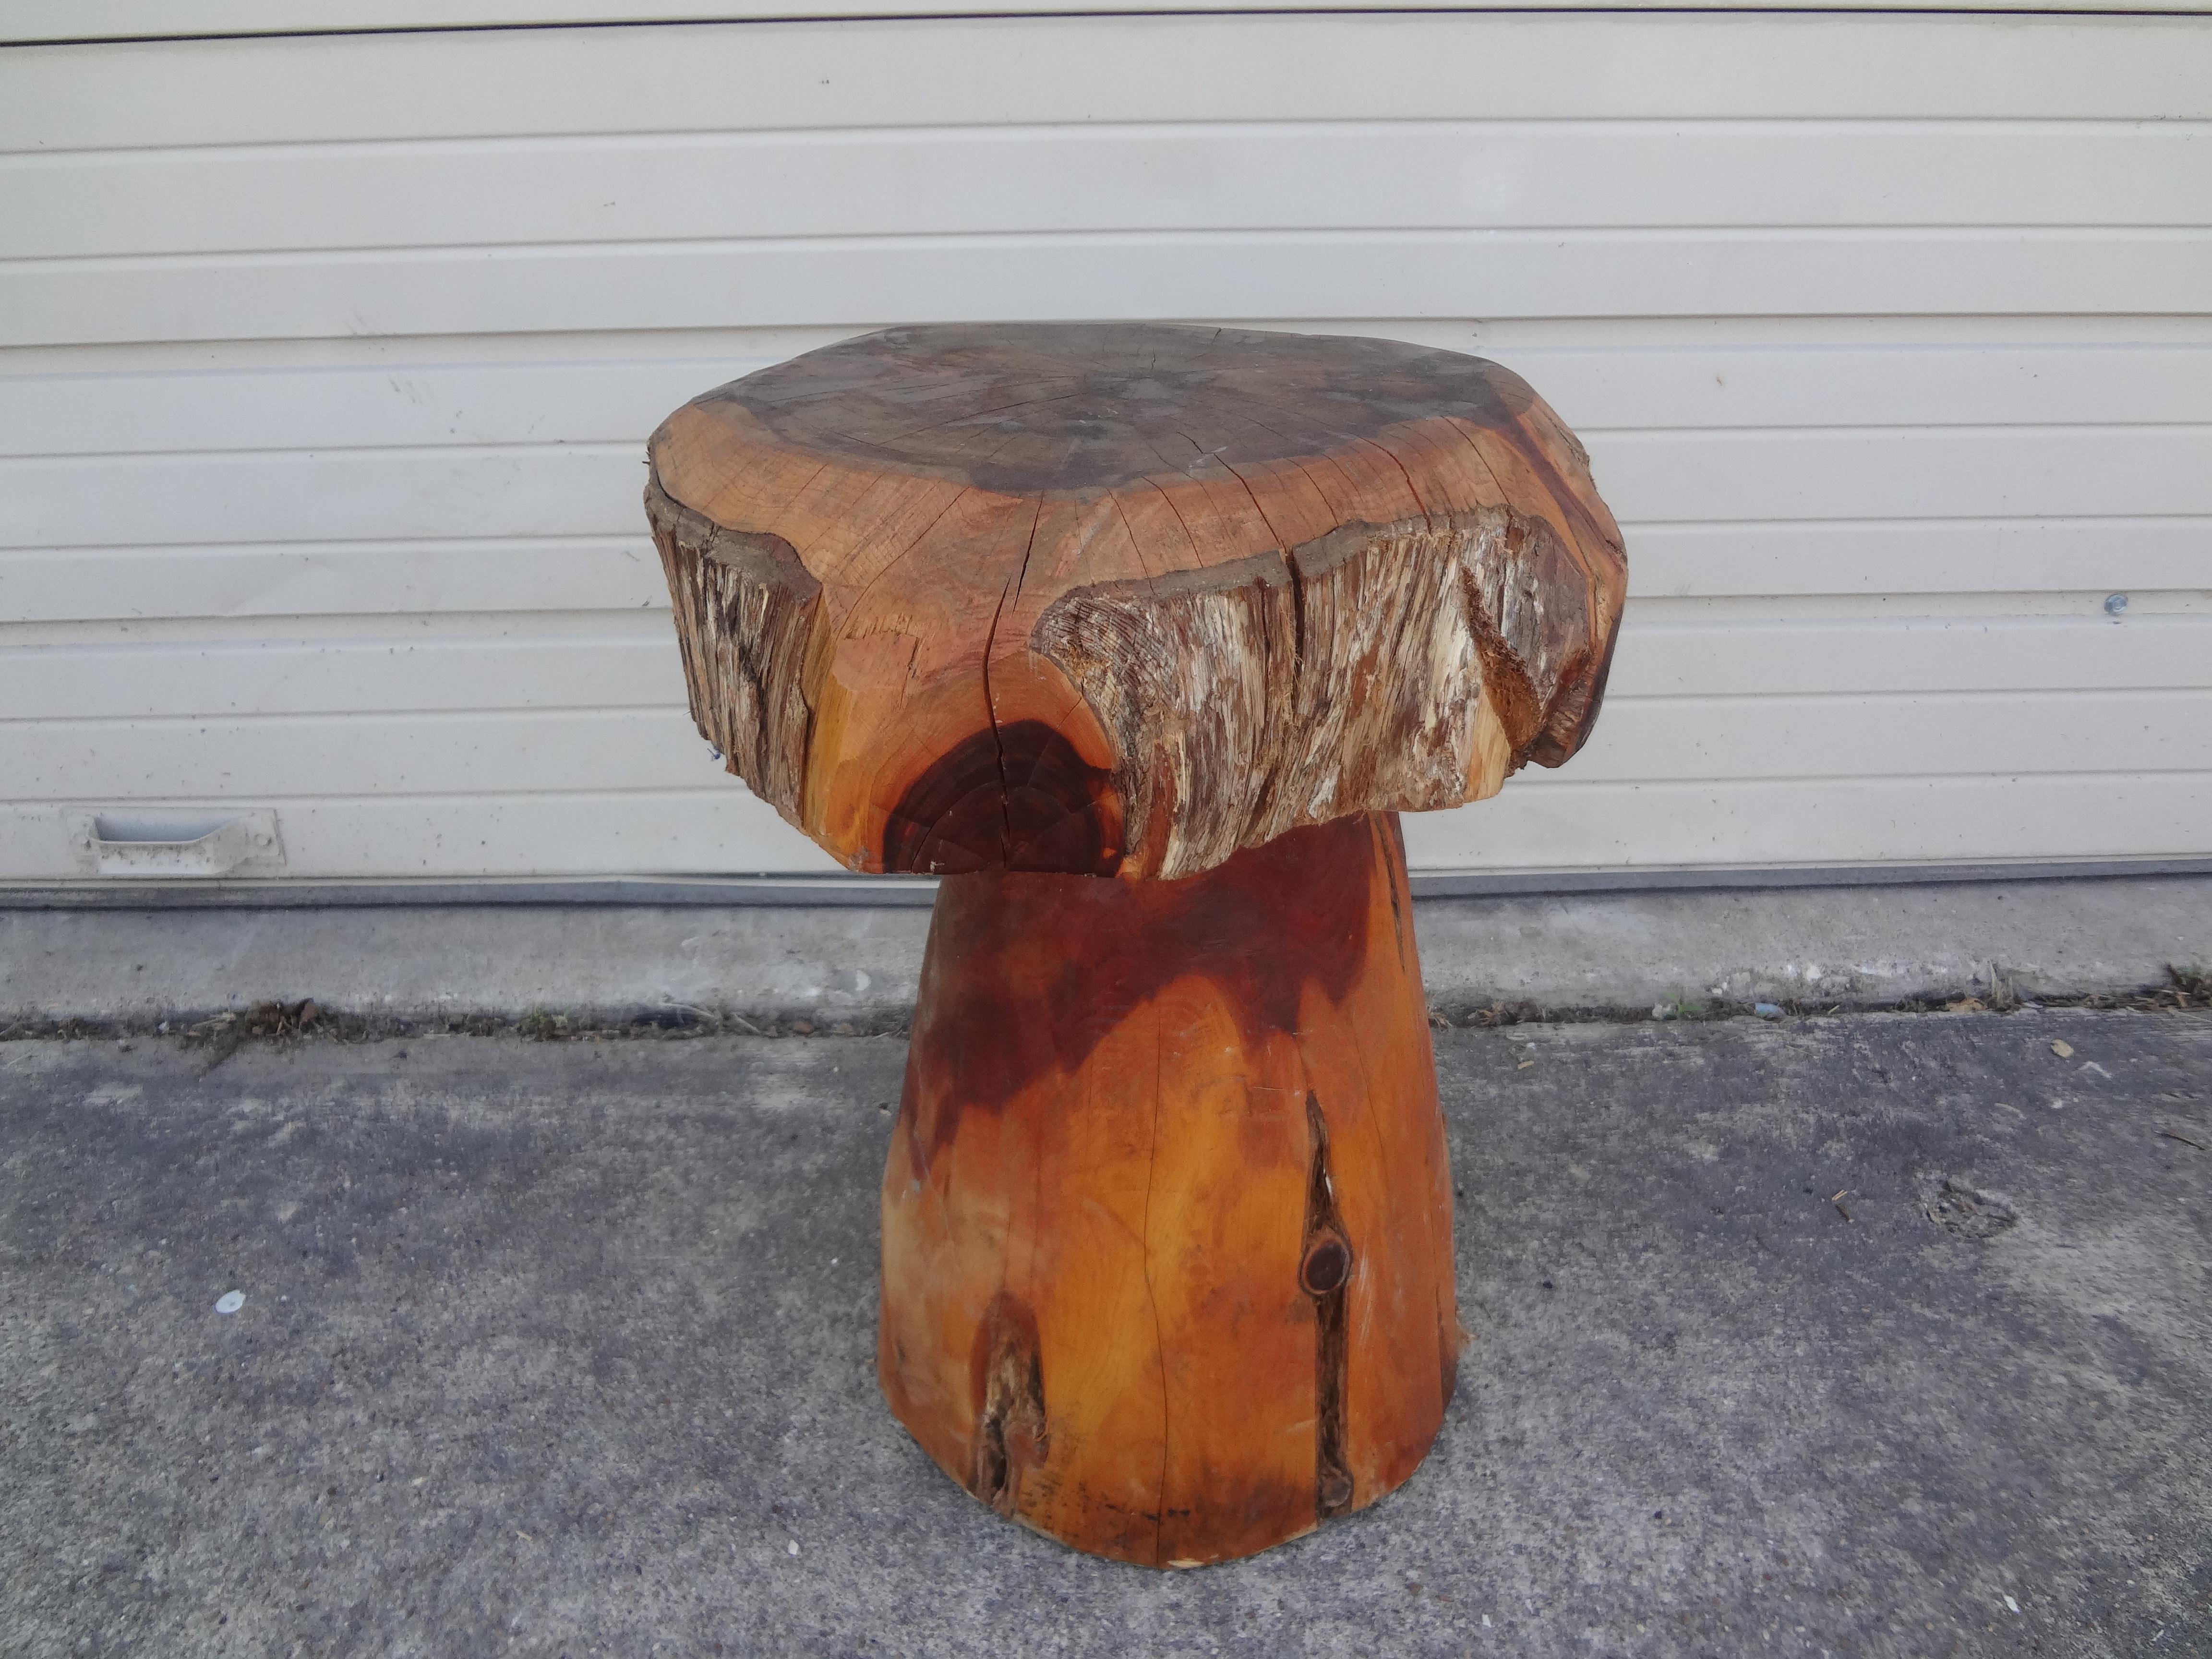 Organic modern carved wood mushroom table. This handsome 20th century carved wood table in the shape of a mushroom is a great side table that works 
in many interiors.